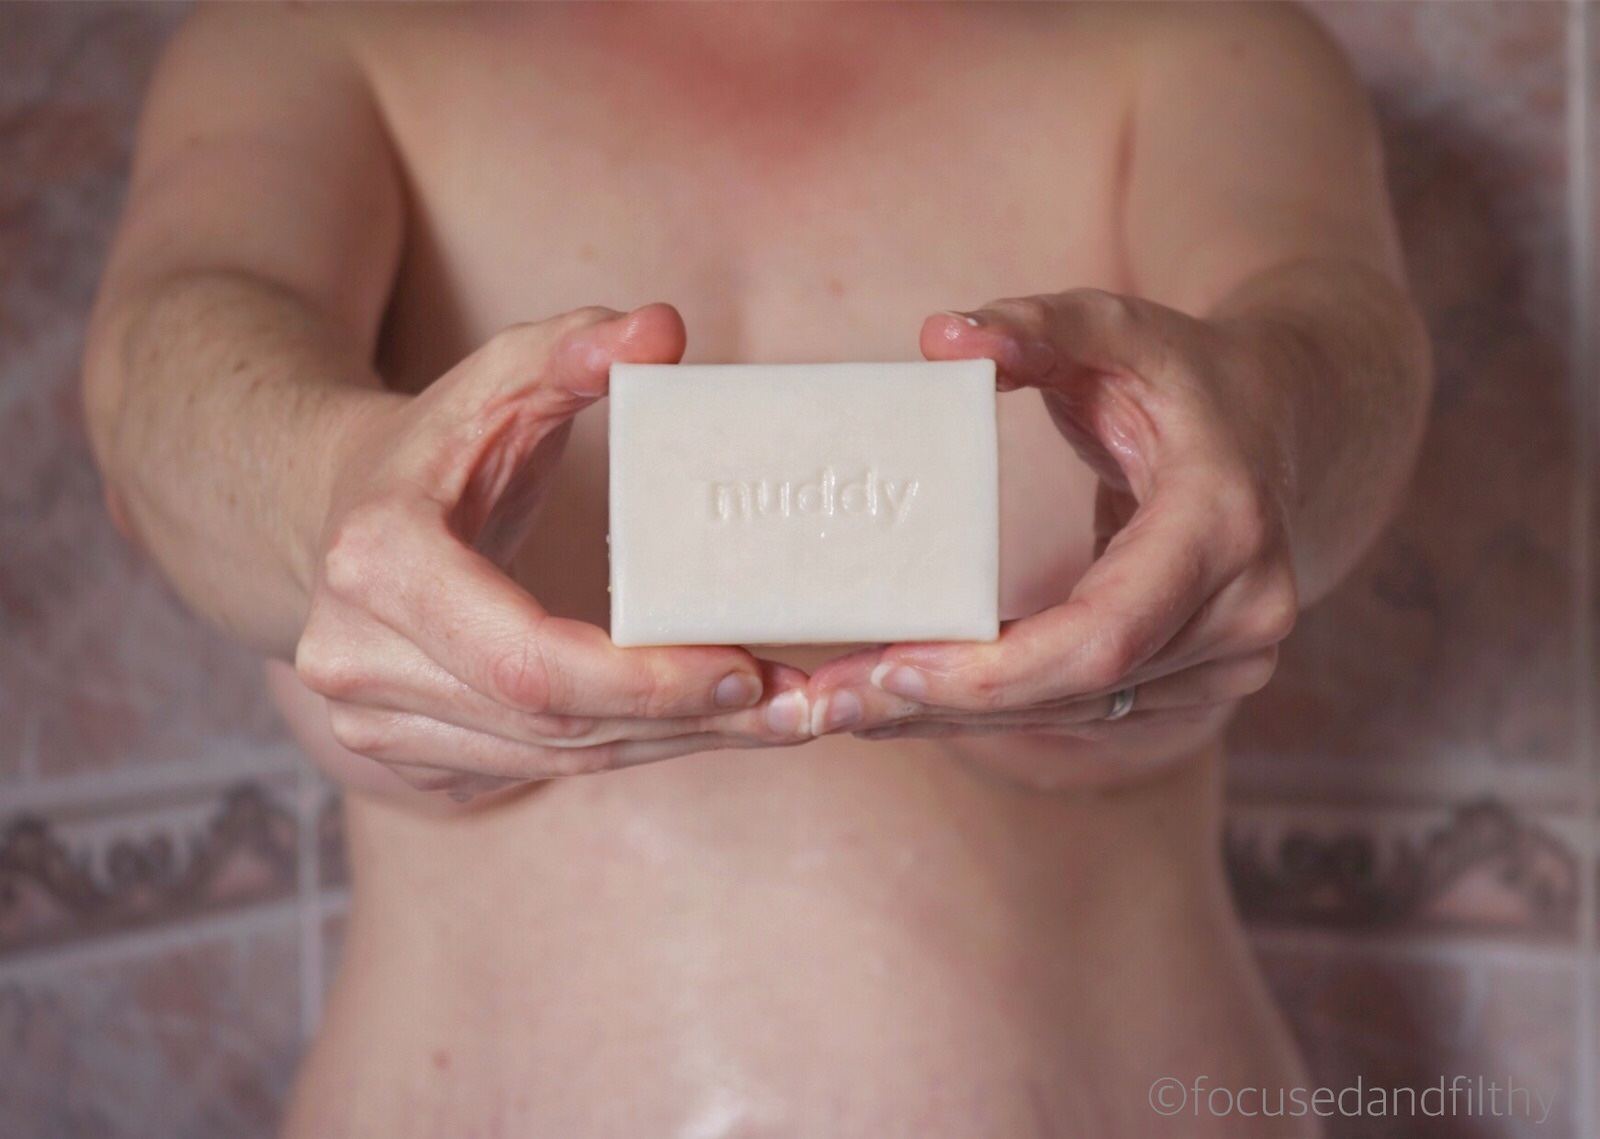 Colour photograph of a naked woman’s body in a bathroom and she is holding out a bar of soap closer to the camera which covers any of her breast. There is a word on the bar of soap which is Nuddy. 